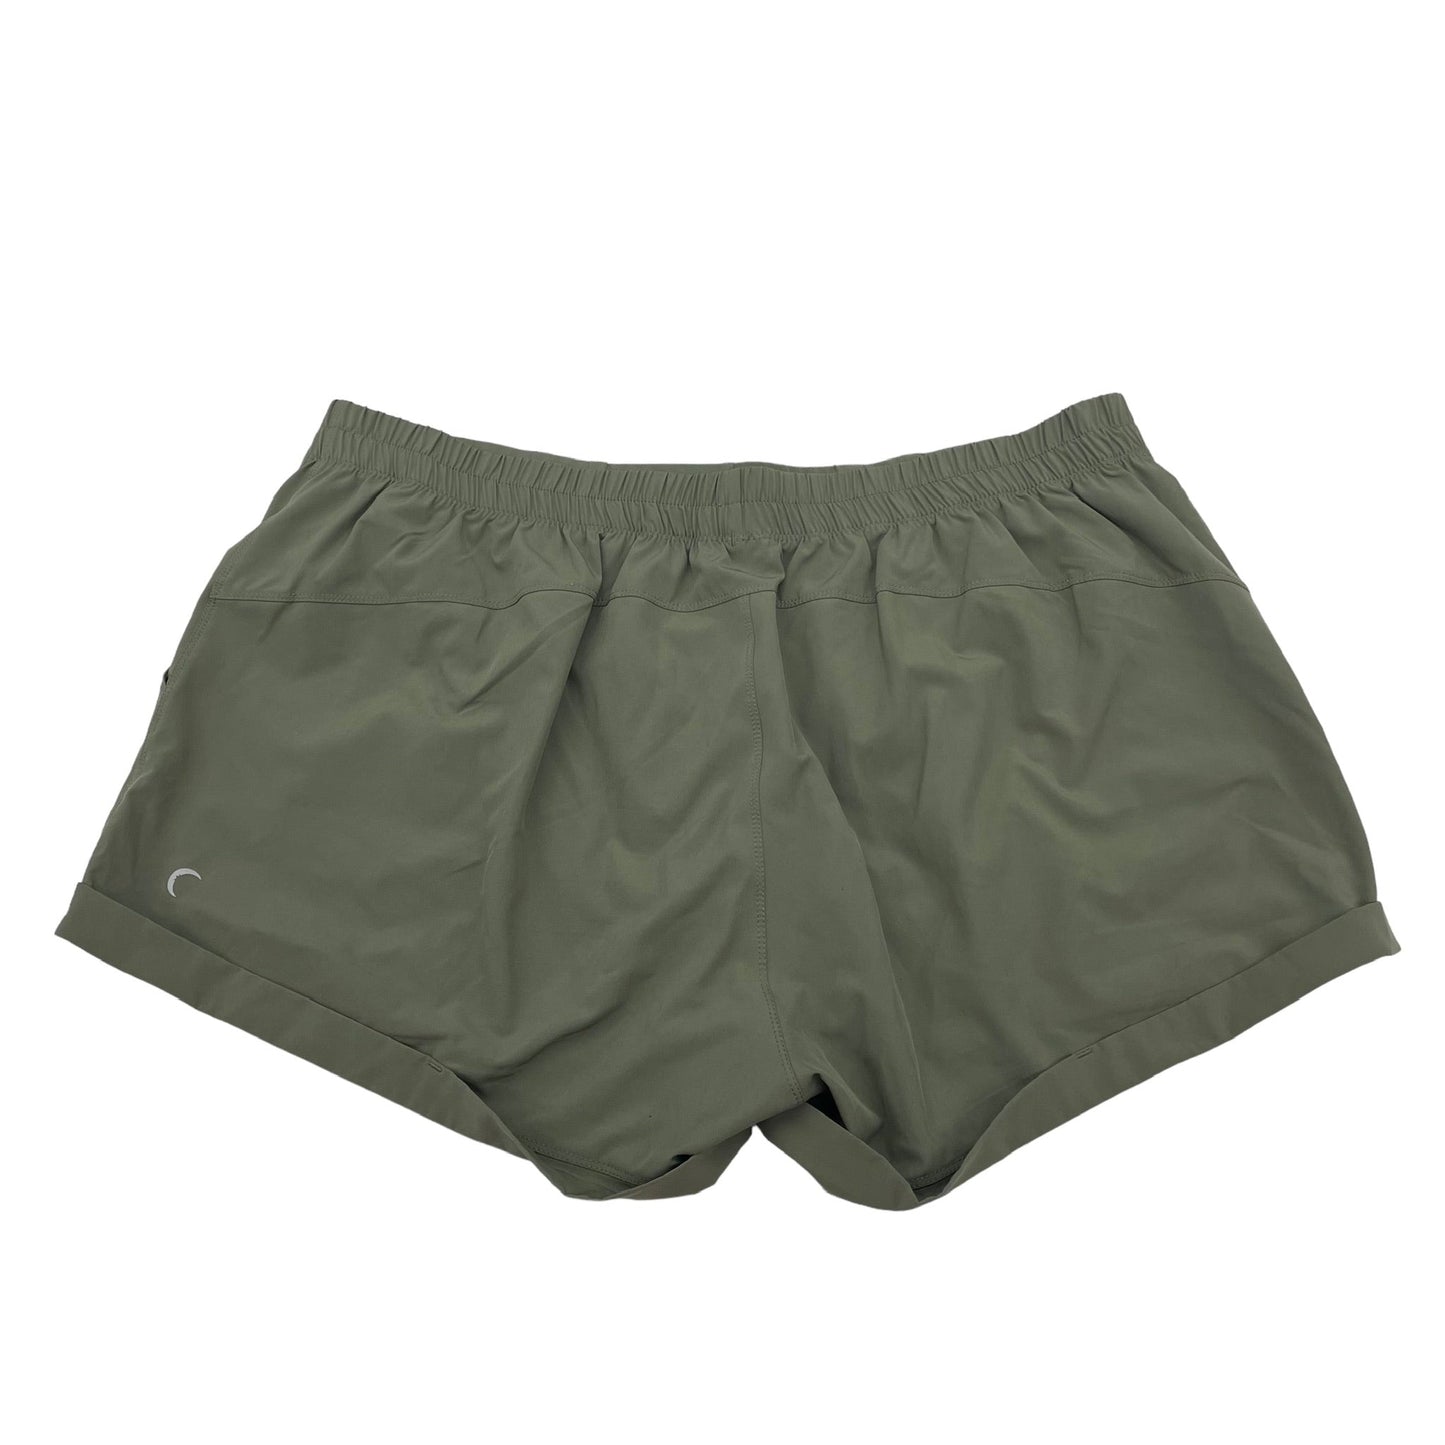 Green Athletic Shorts Zyia, Size 3x